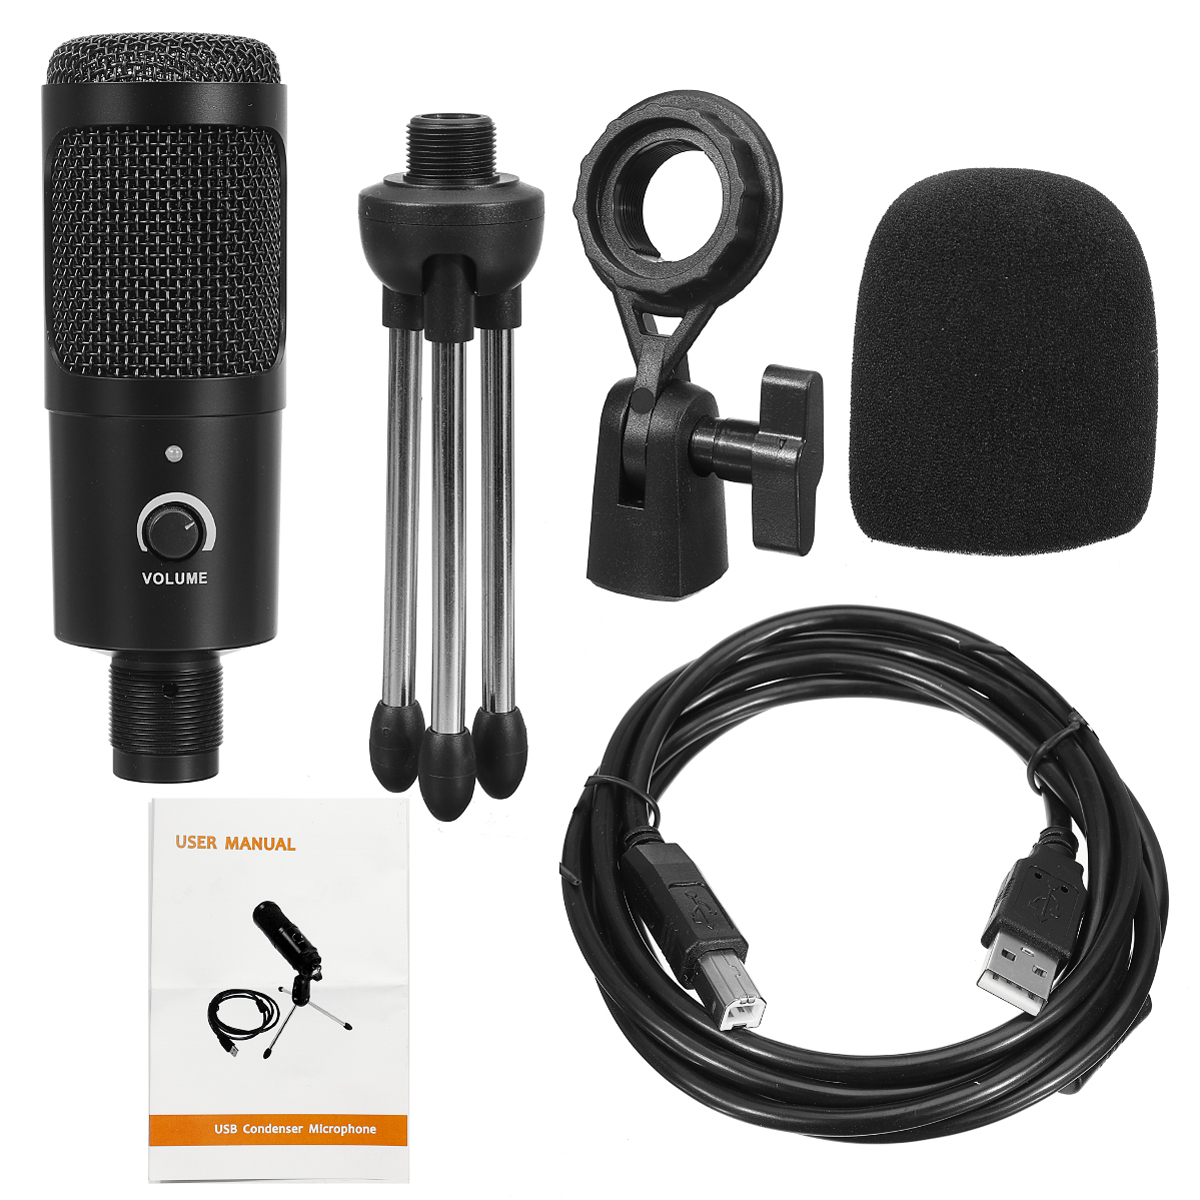 Wired-USB-Microphone-with-Tripod-for-Computer-Windows-for-Mac-PC-Live-Broadcast-Video-Conferencing-A-1866200-13